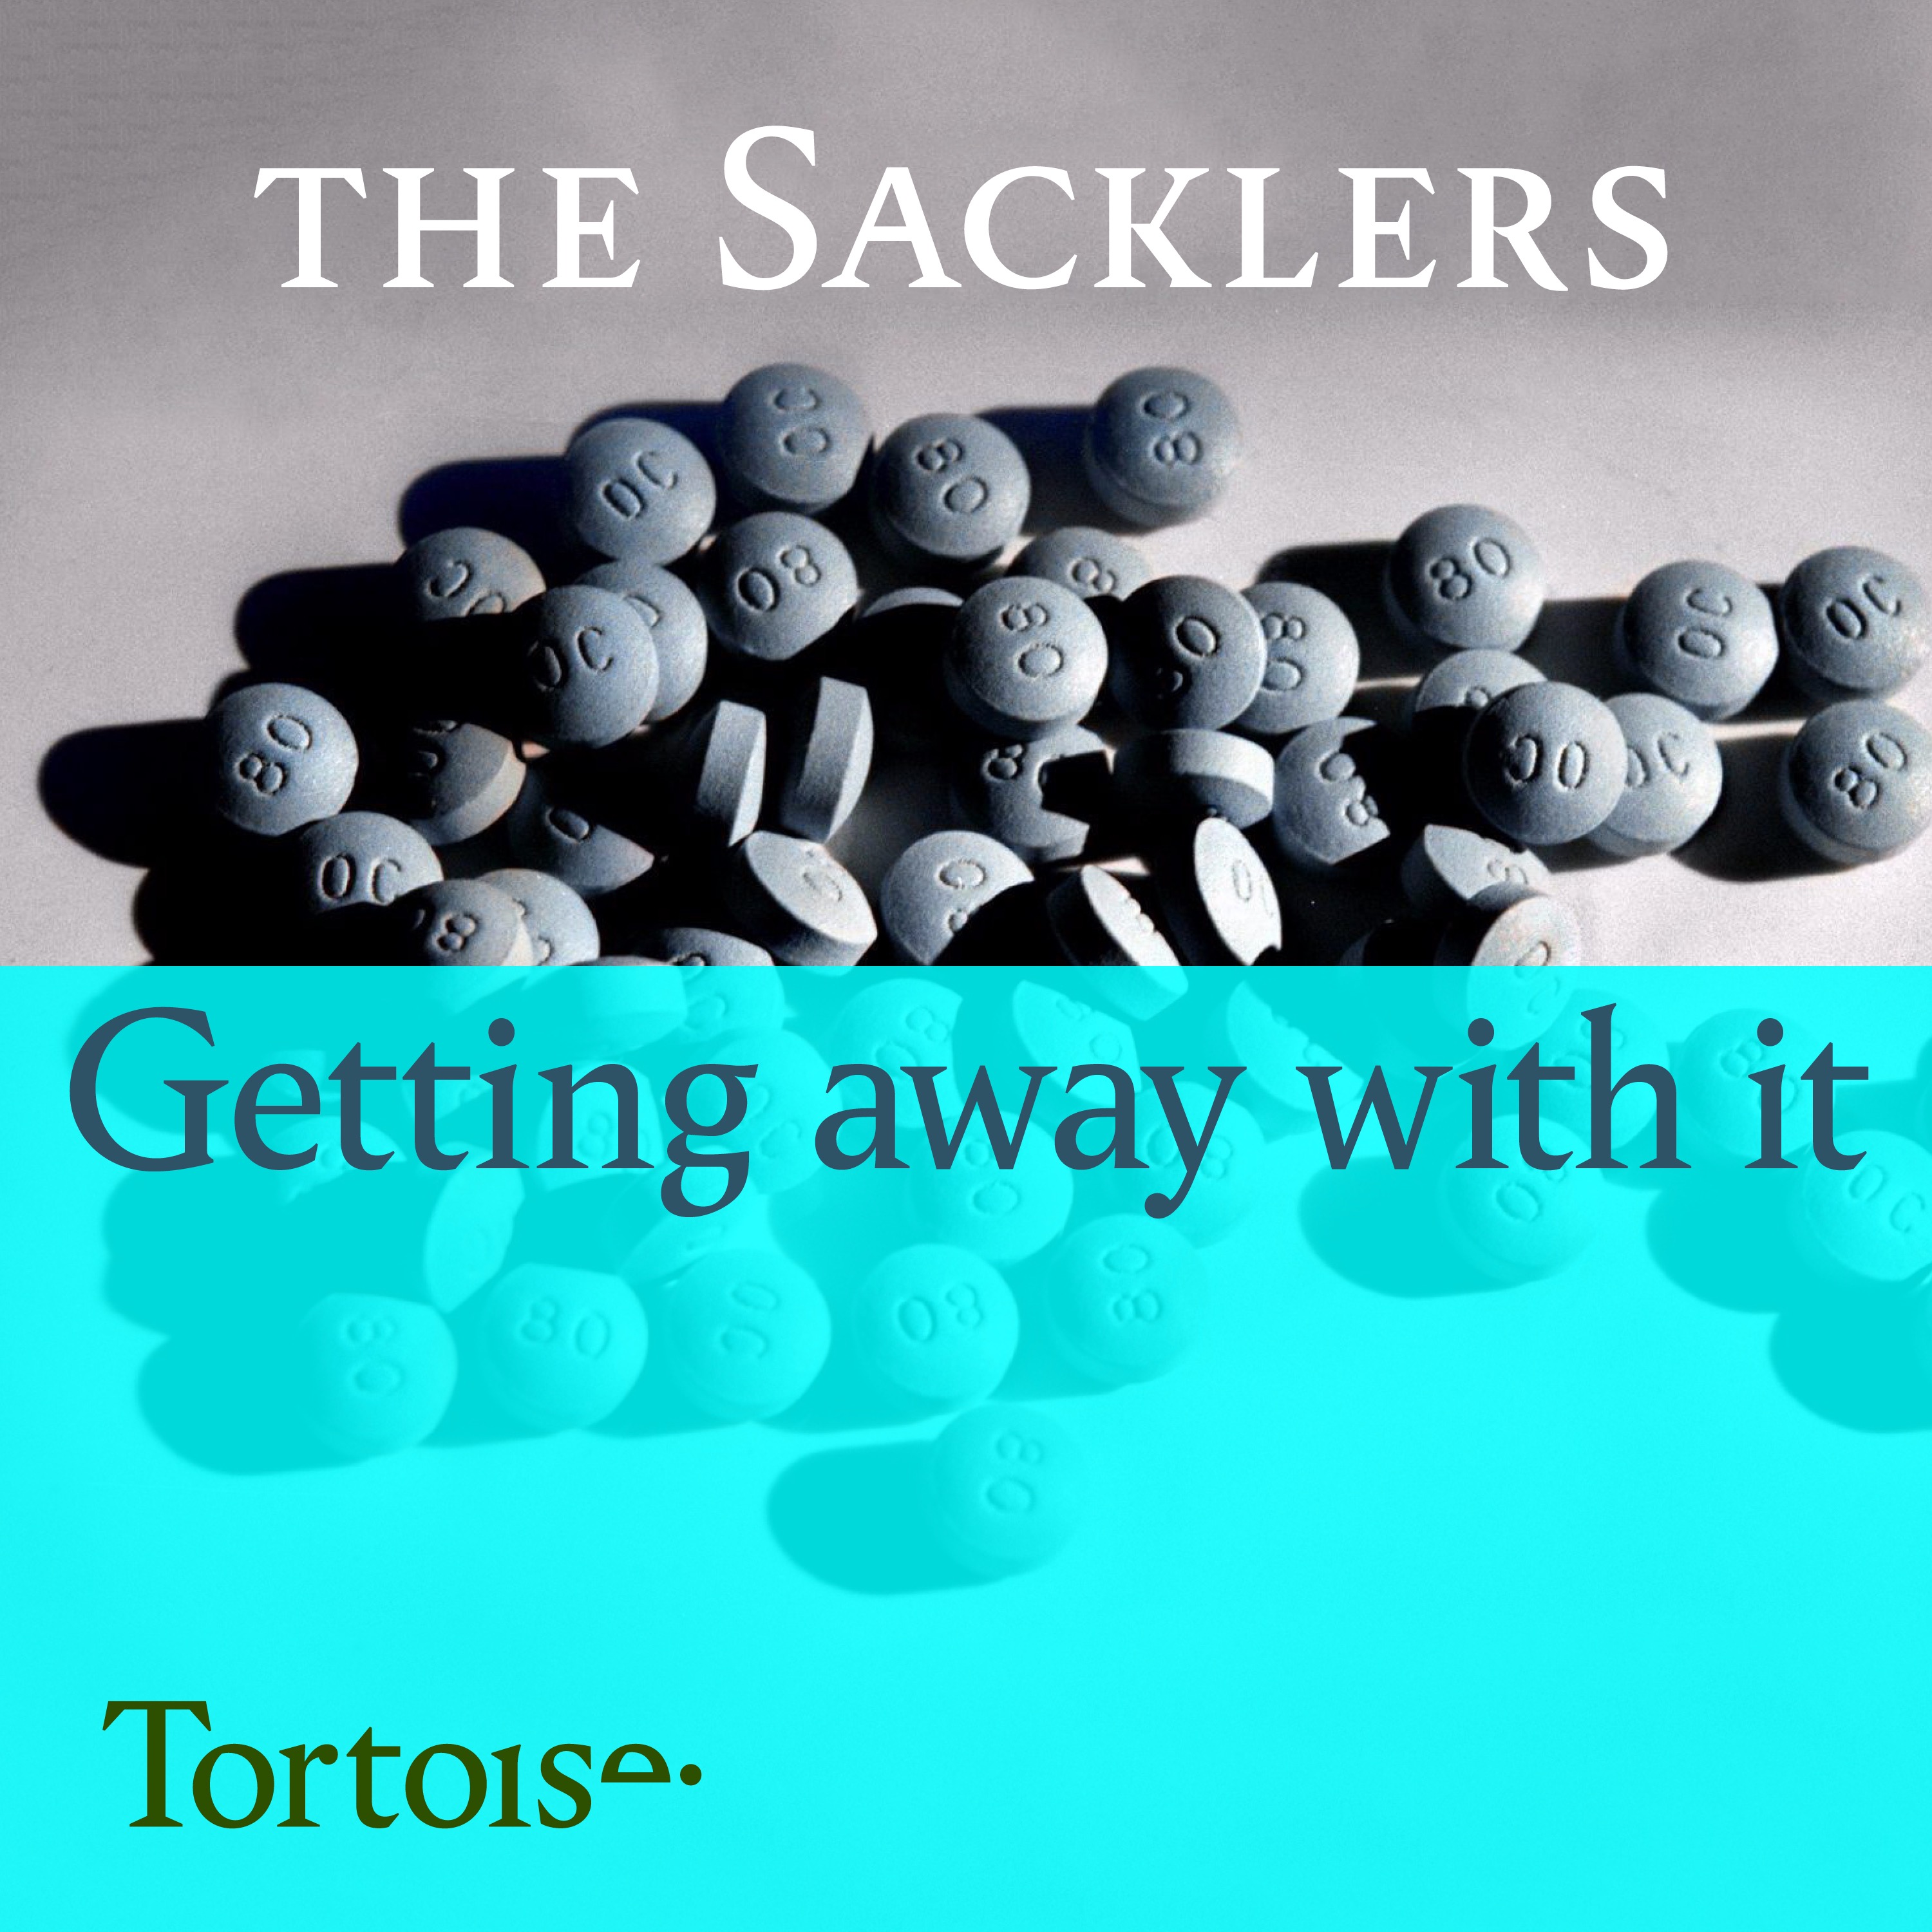 The Sacklers: Getting away with it